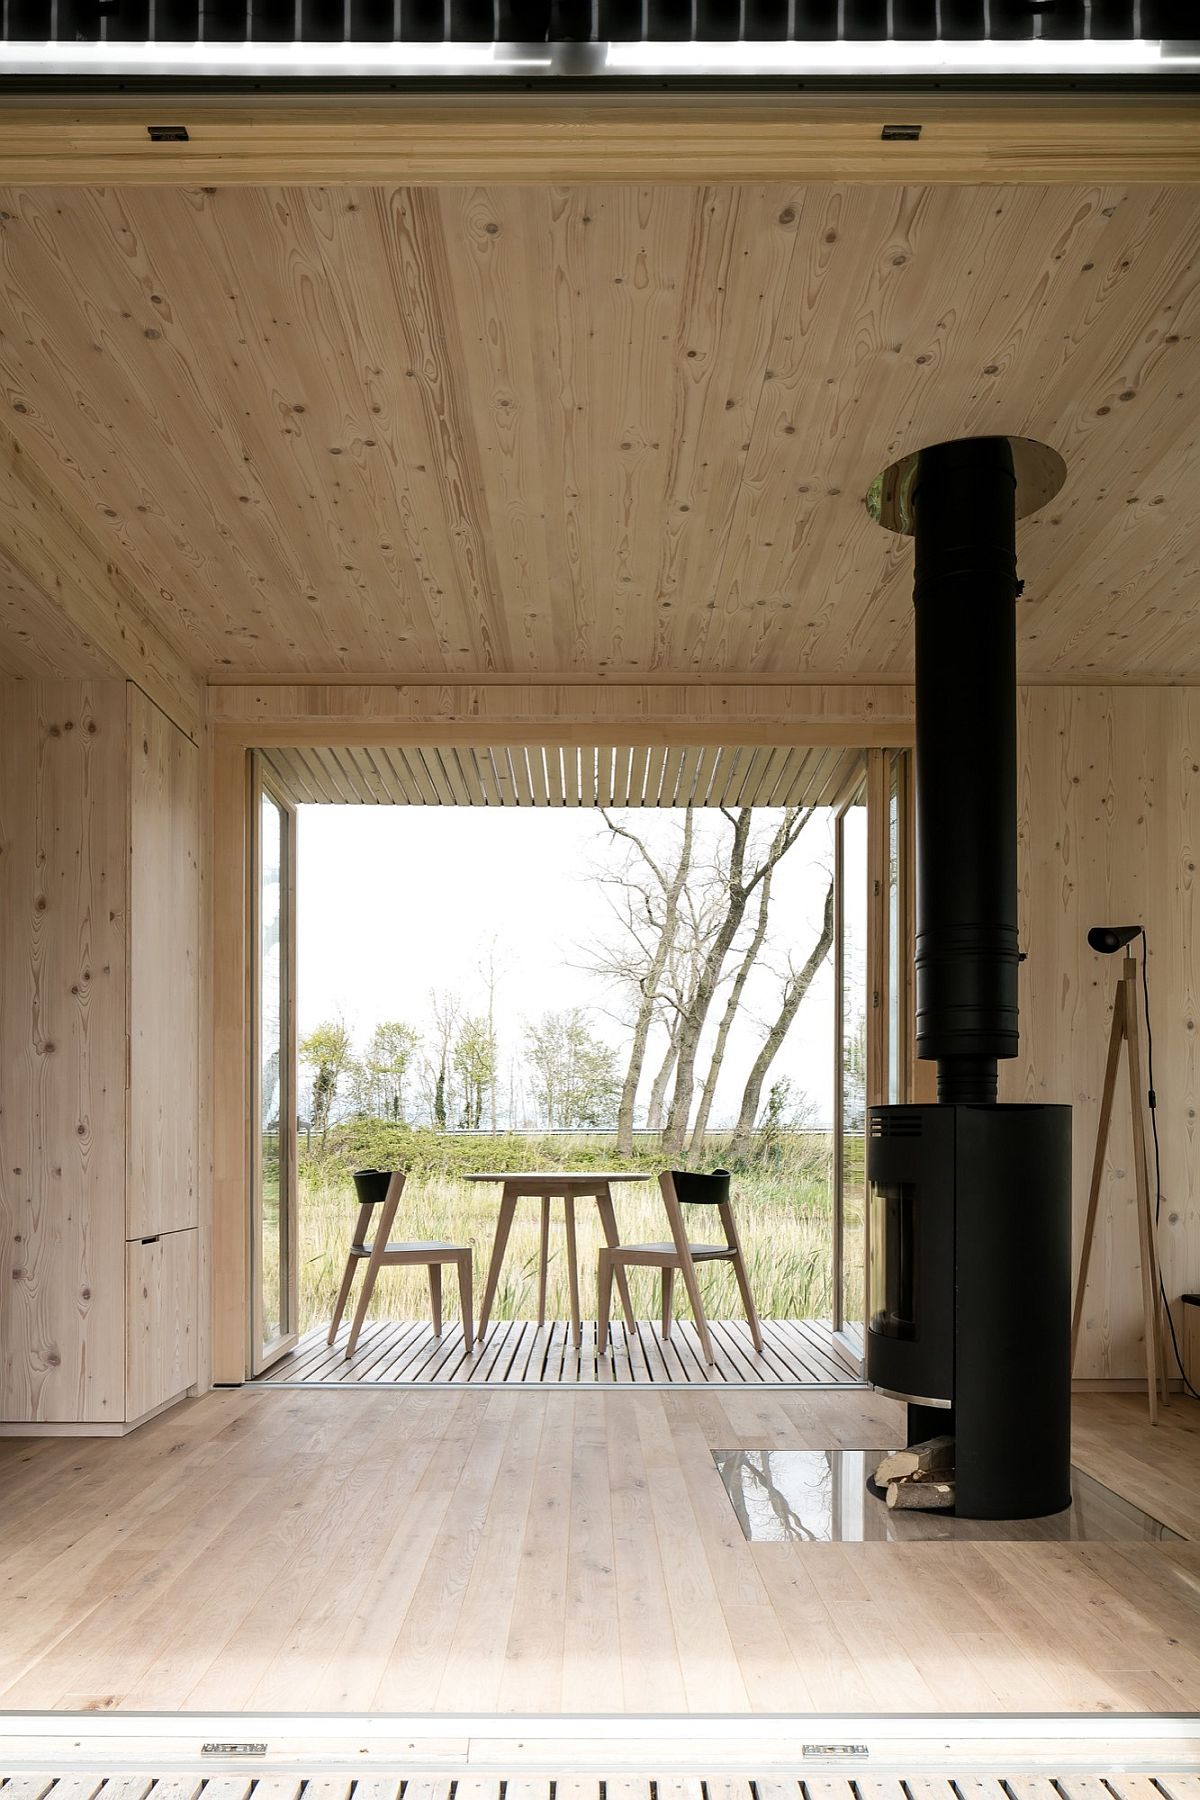 Cabin-interior-has-a-lovely-indoor-outdoor-interplay-along-with-a-minimal-design-26508